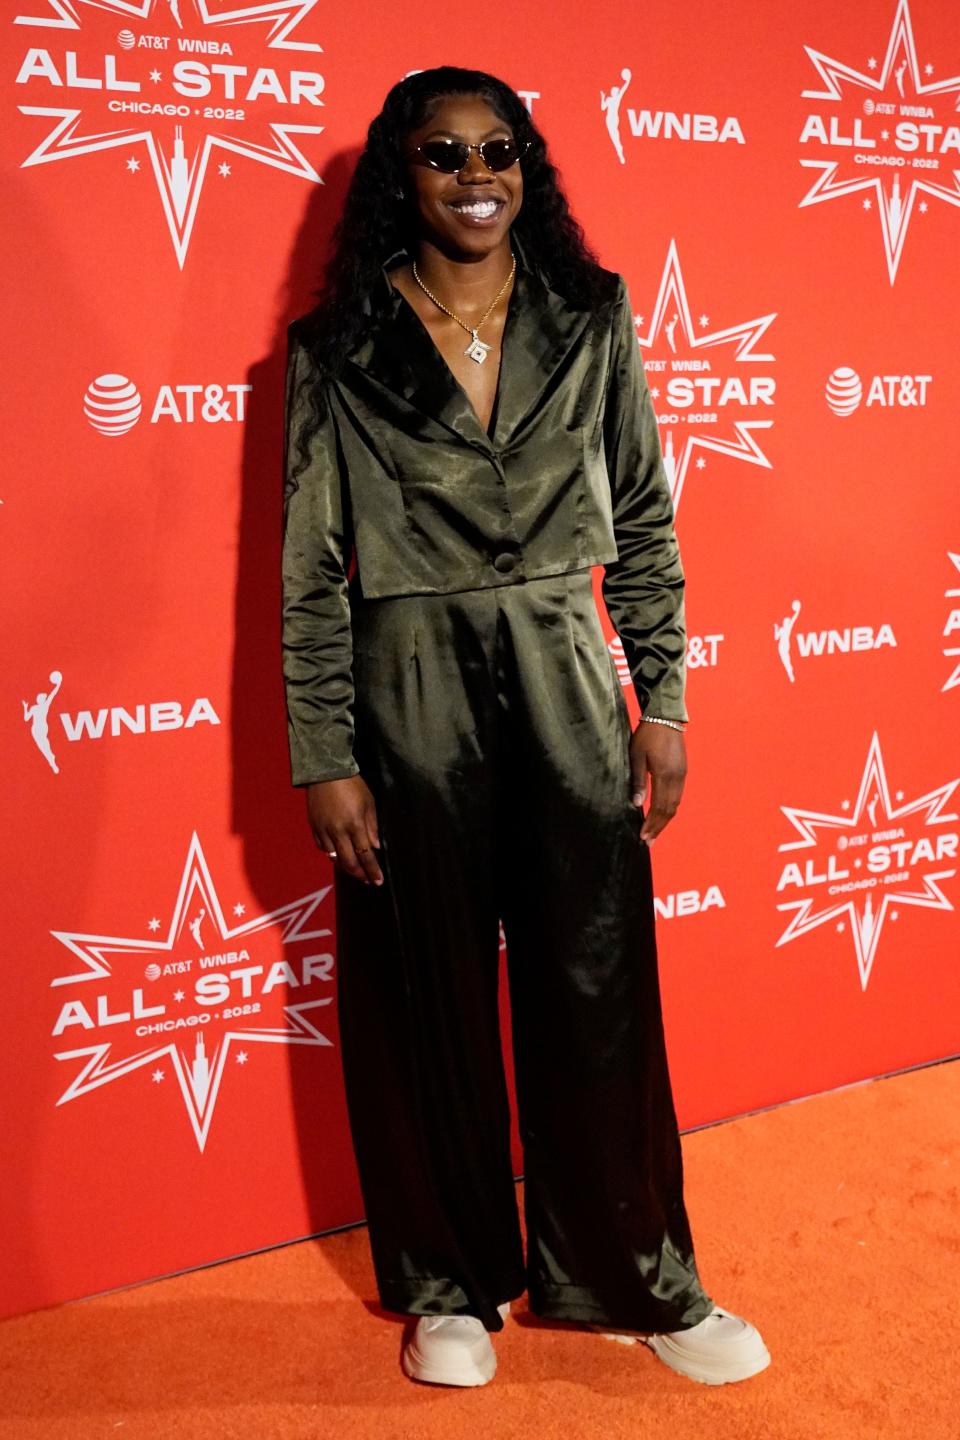 Dallas Wings' Arike Ogunbowale walks the orange carpet for WNBA All-Star events last season in Chicago. The Divine Savior Holy Angels graduate will be part of the NBA all-star celebrity game on Friday night.